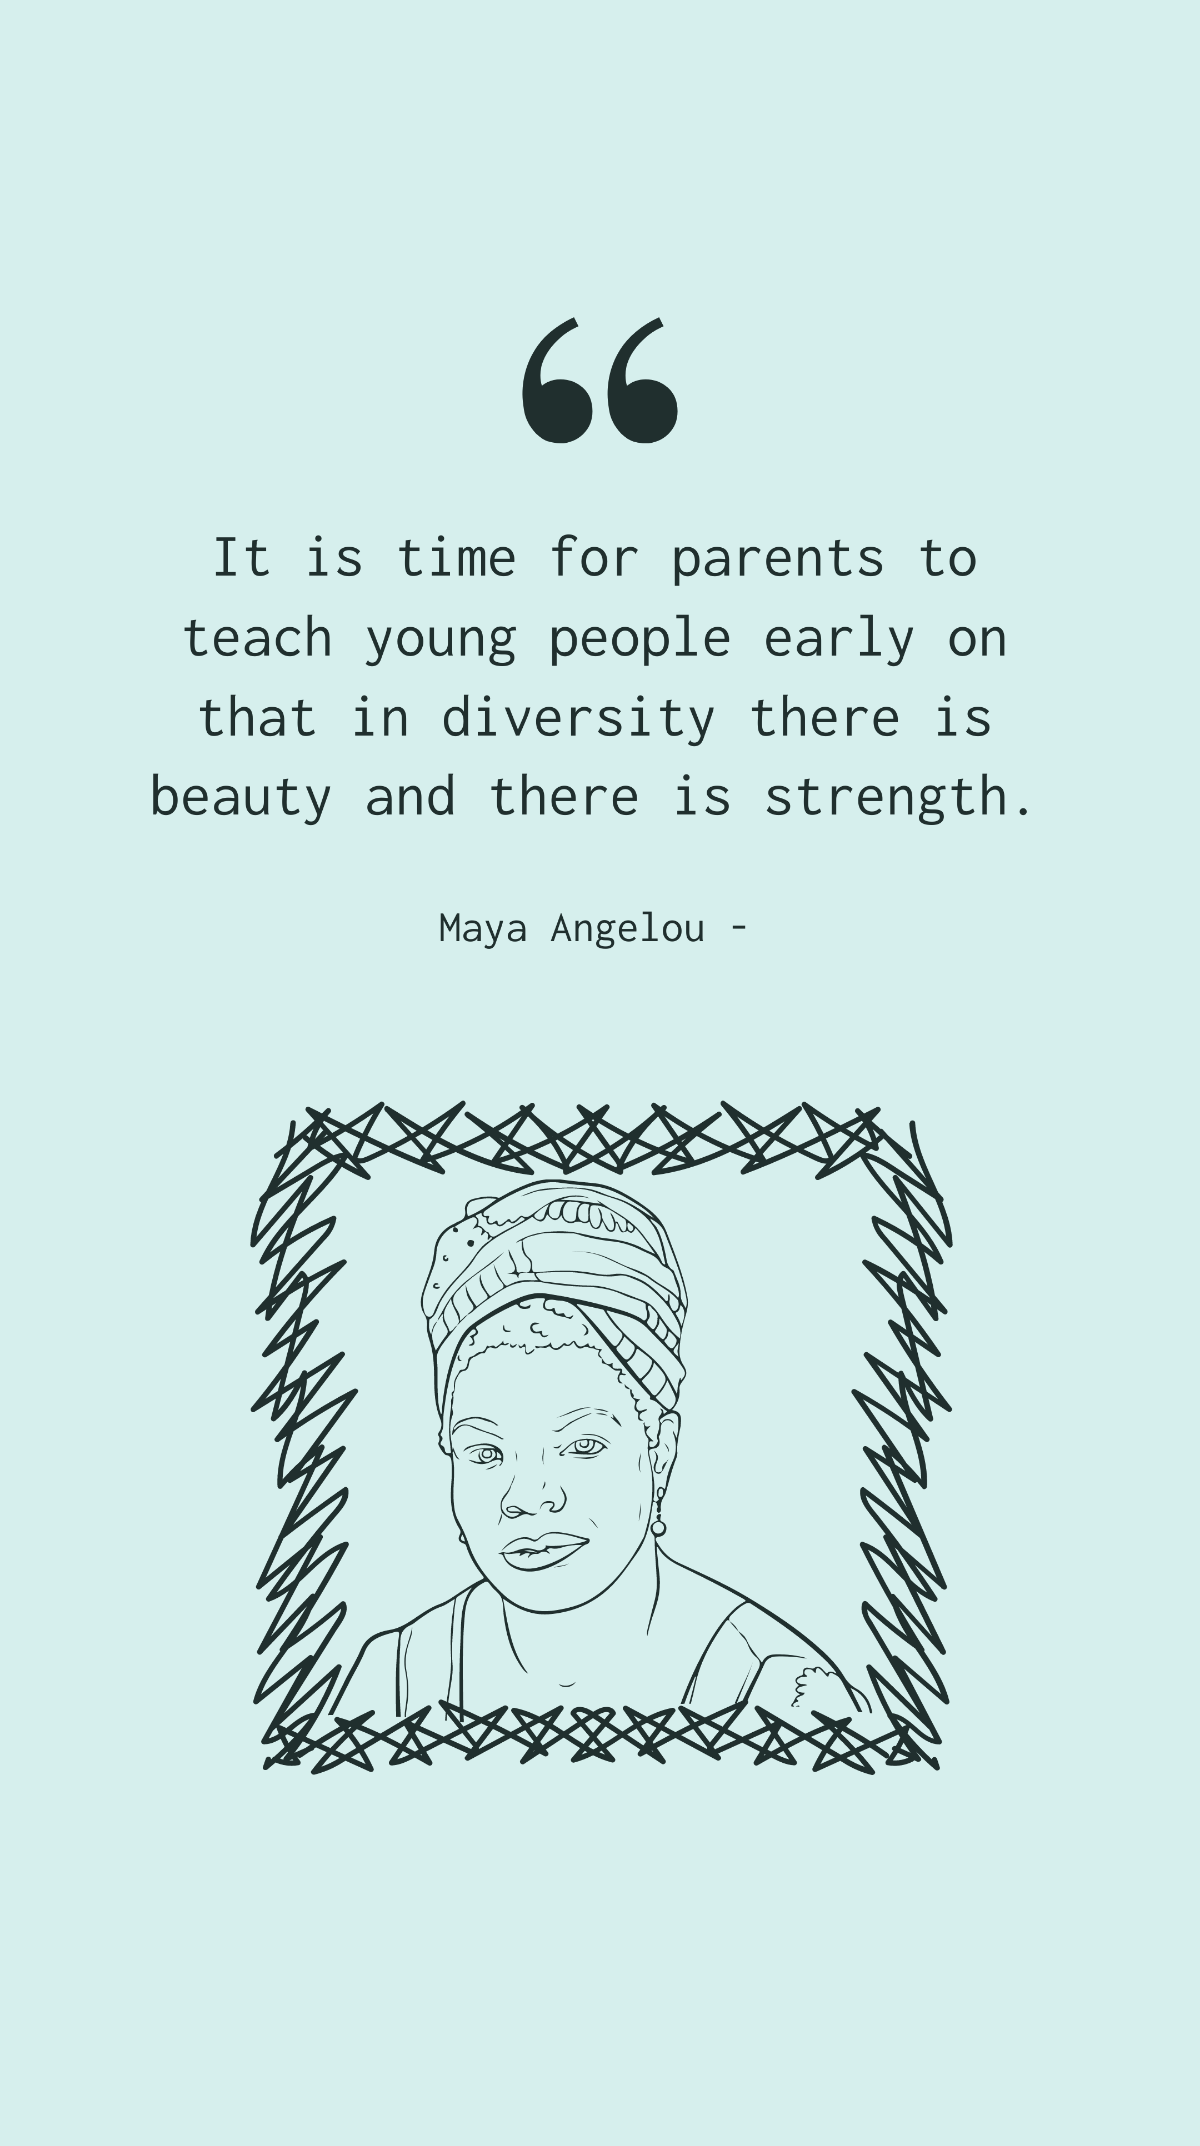 Free Maya Angelou - It is time for parents to teach young people early on that in diversity there is beauty and there is strength. Template